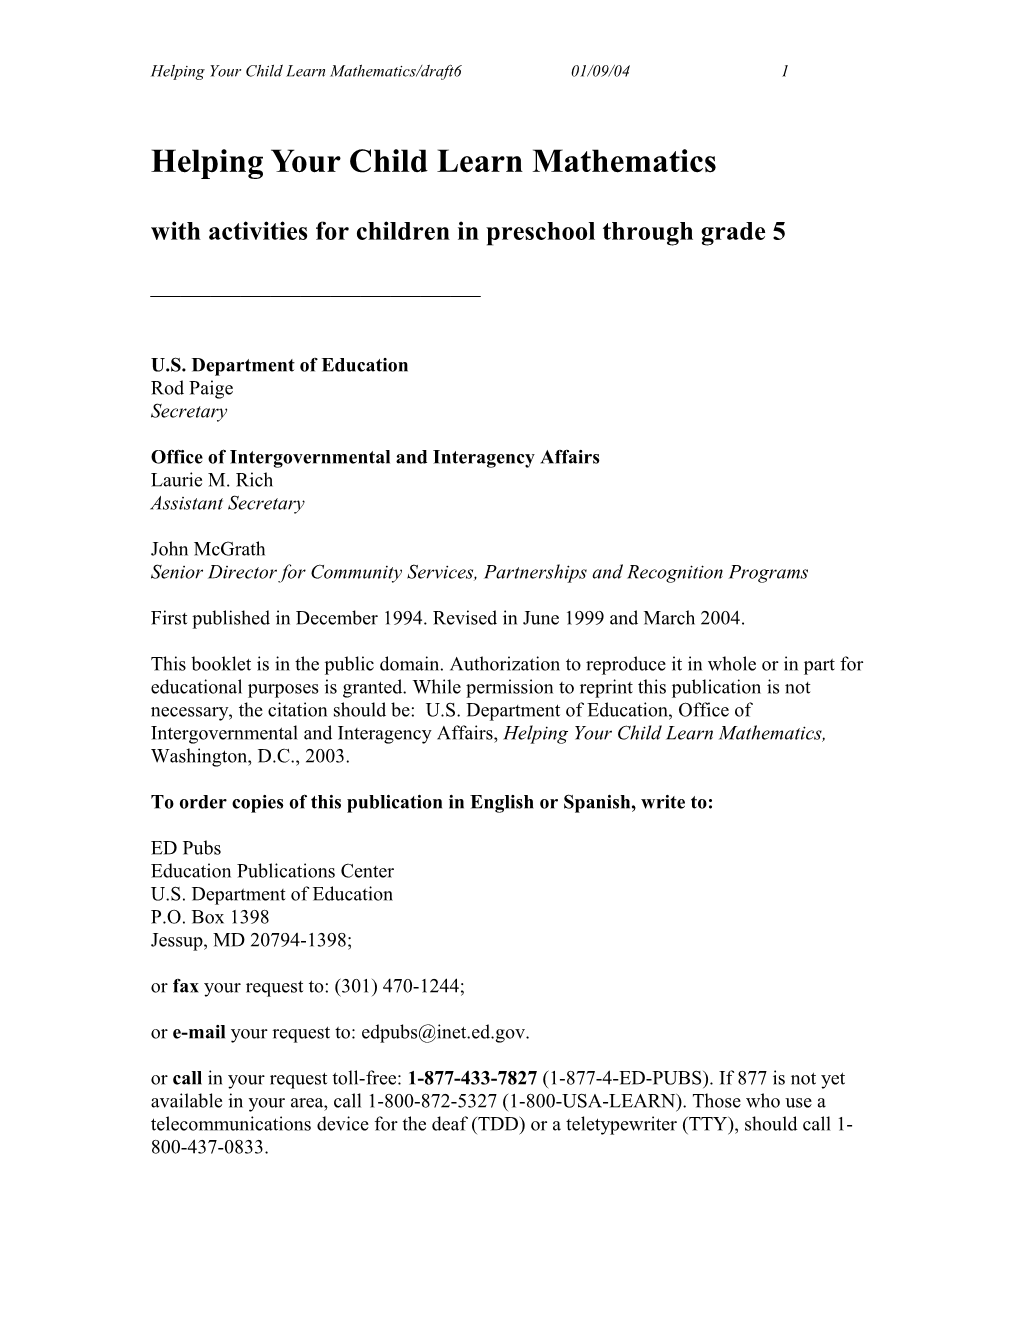 Helping Your Child Learn Mathematics (Word)